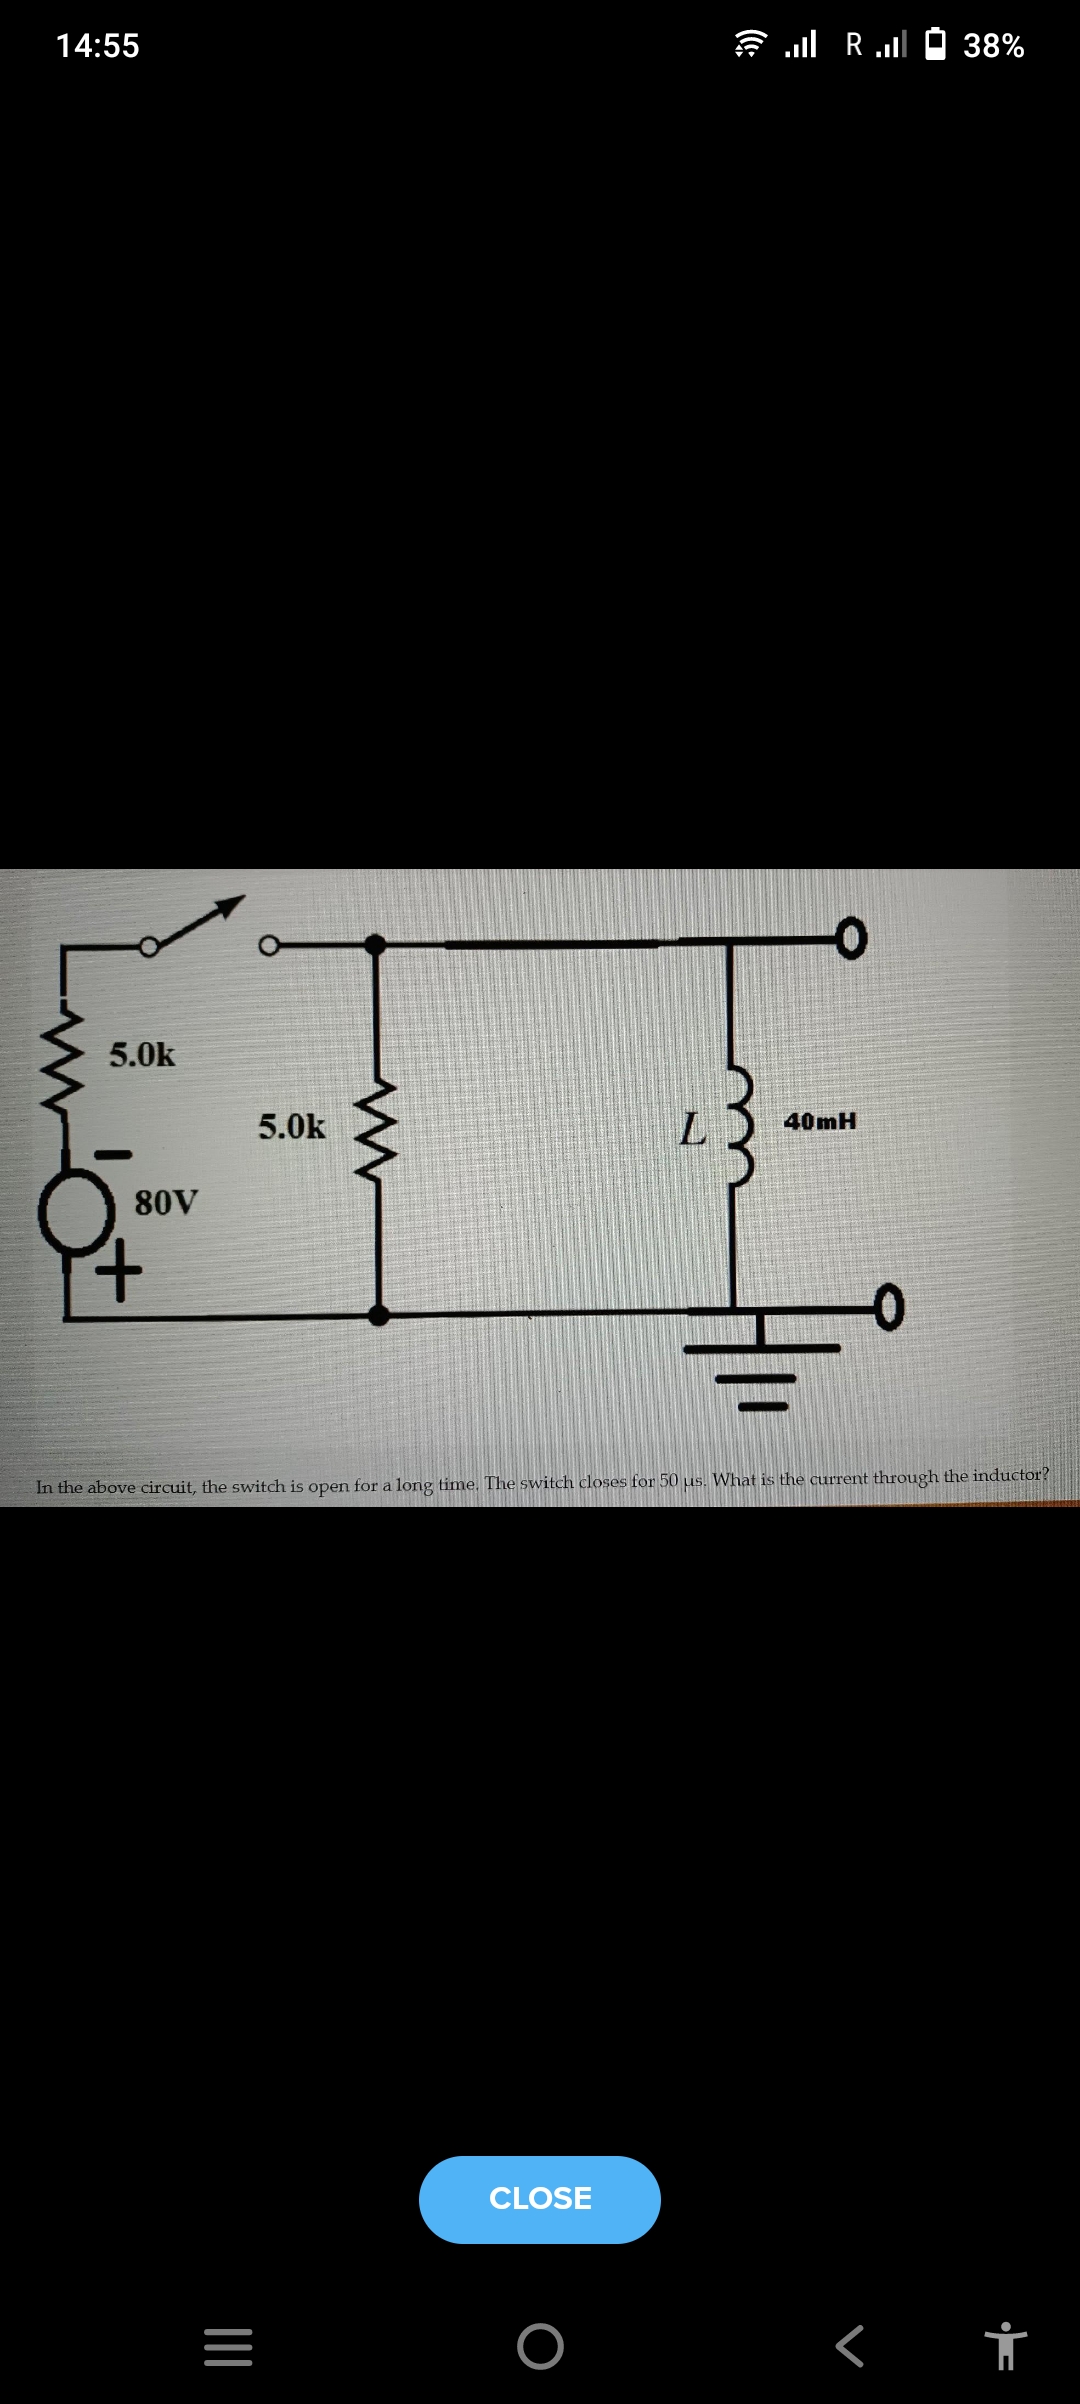 14:55
is l Rull Ó 38%
5.0k
5.0k
40mH
80V
In the above circuit, the switch is open for a long time. The switch closes for 50 us. What is the current through the inductor?
CLOSE
